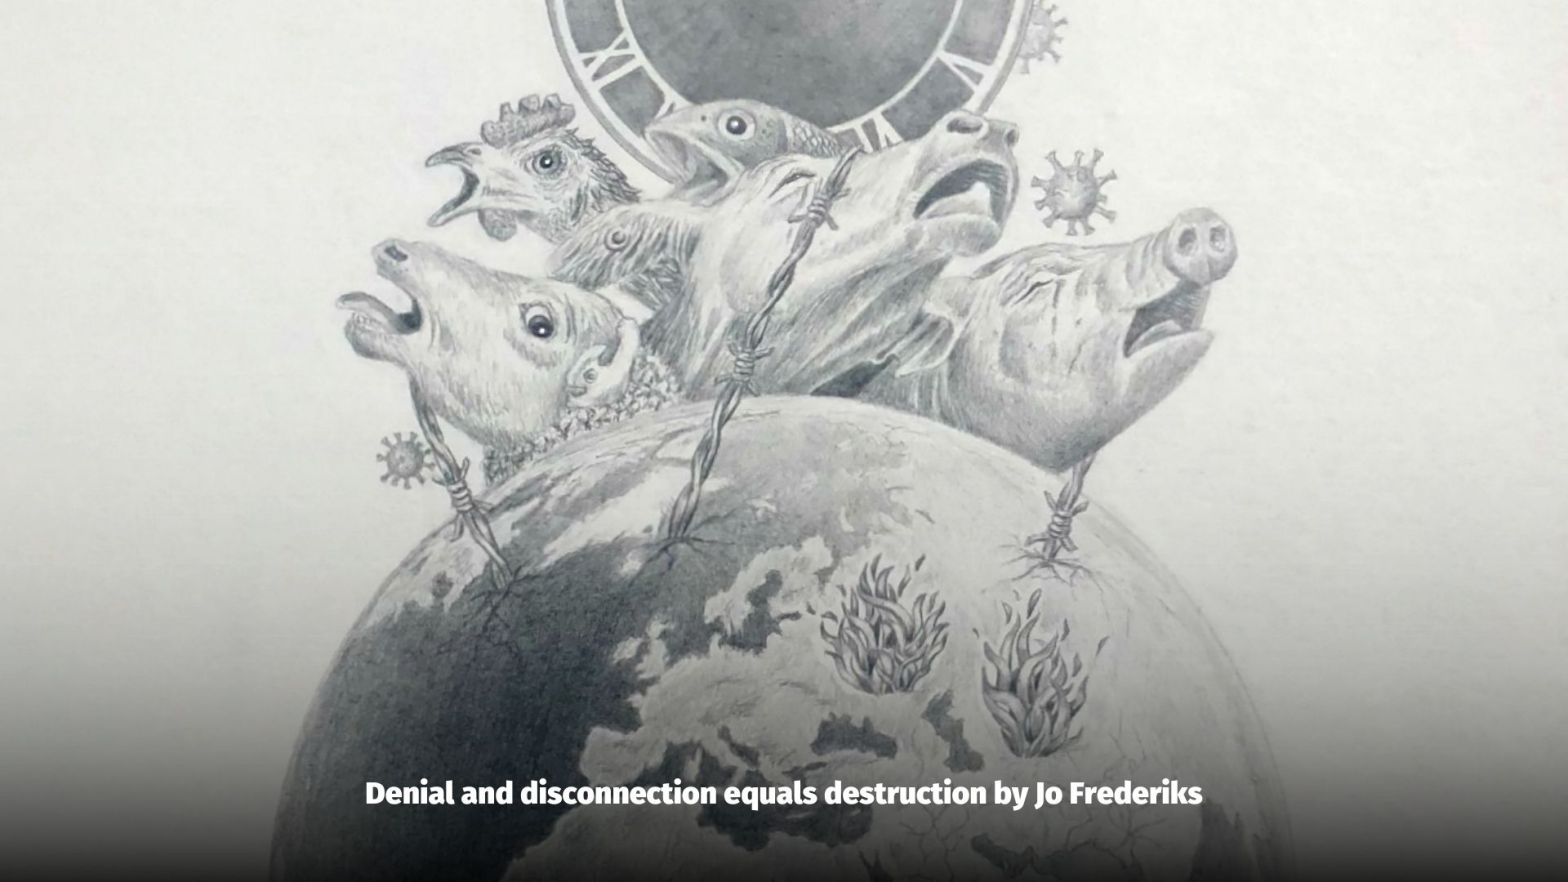 Denial and disconnection equals destruction by Jo Frederiks